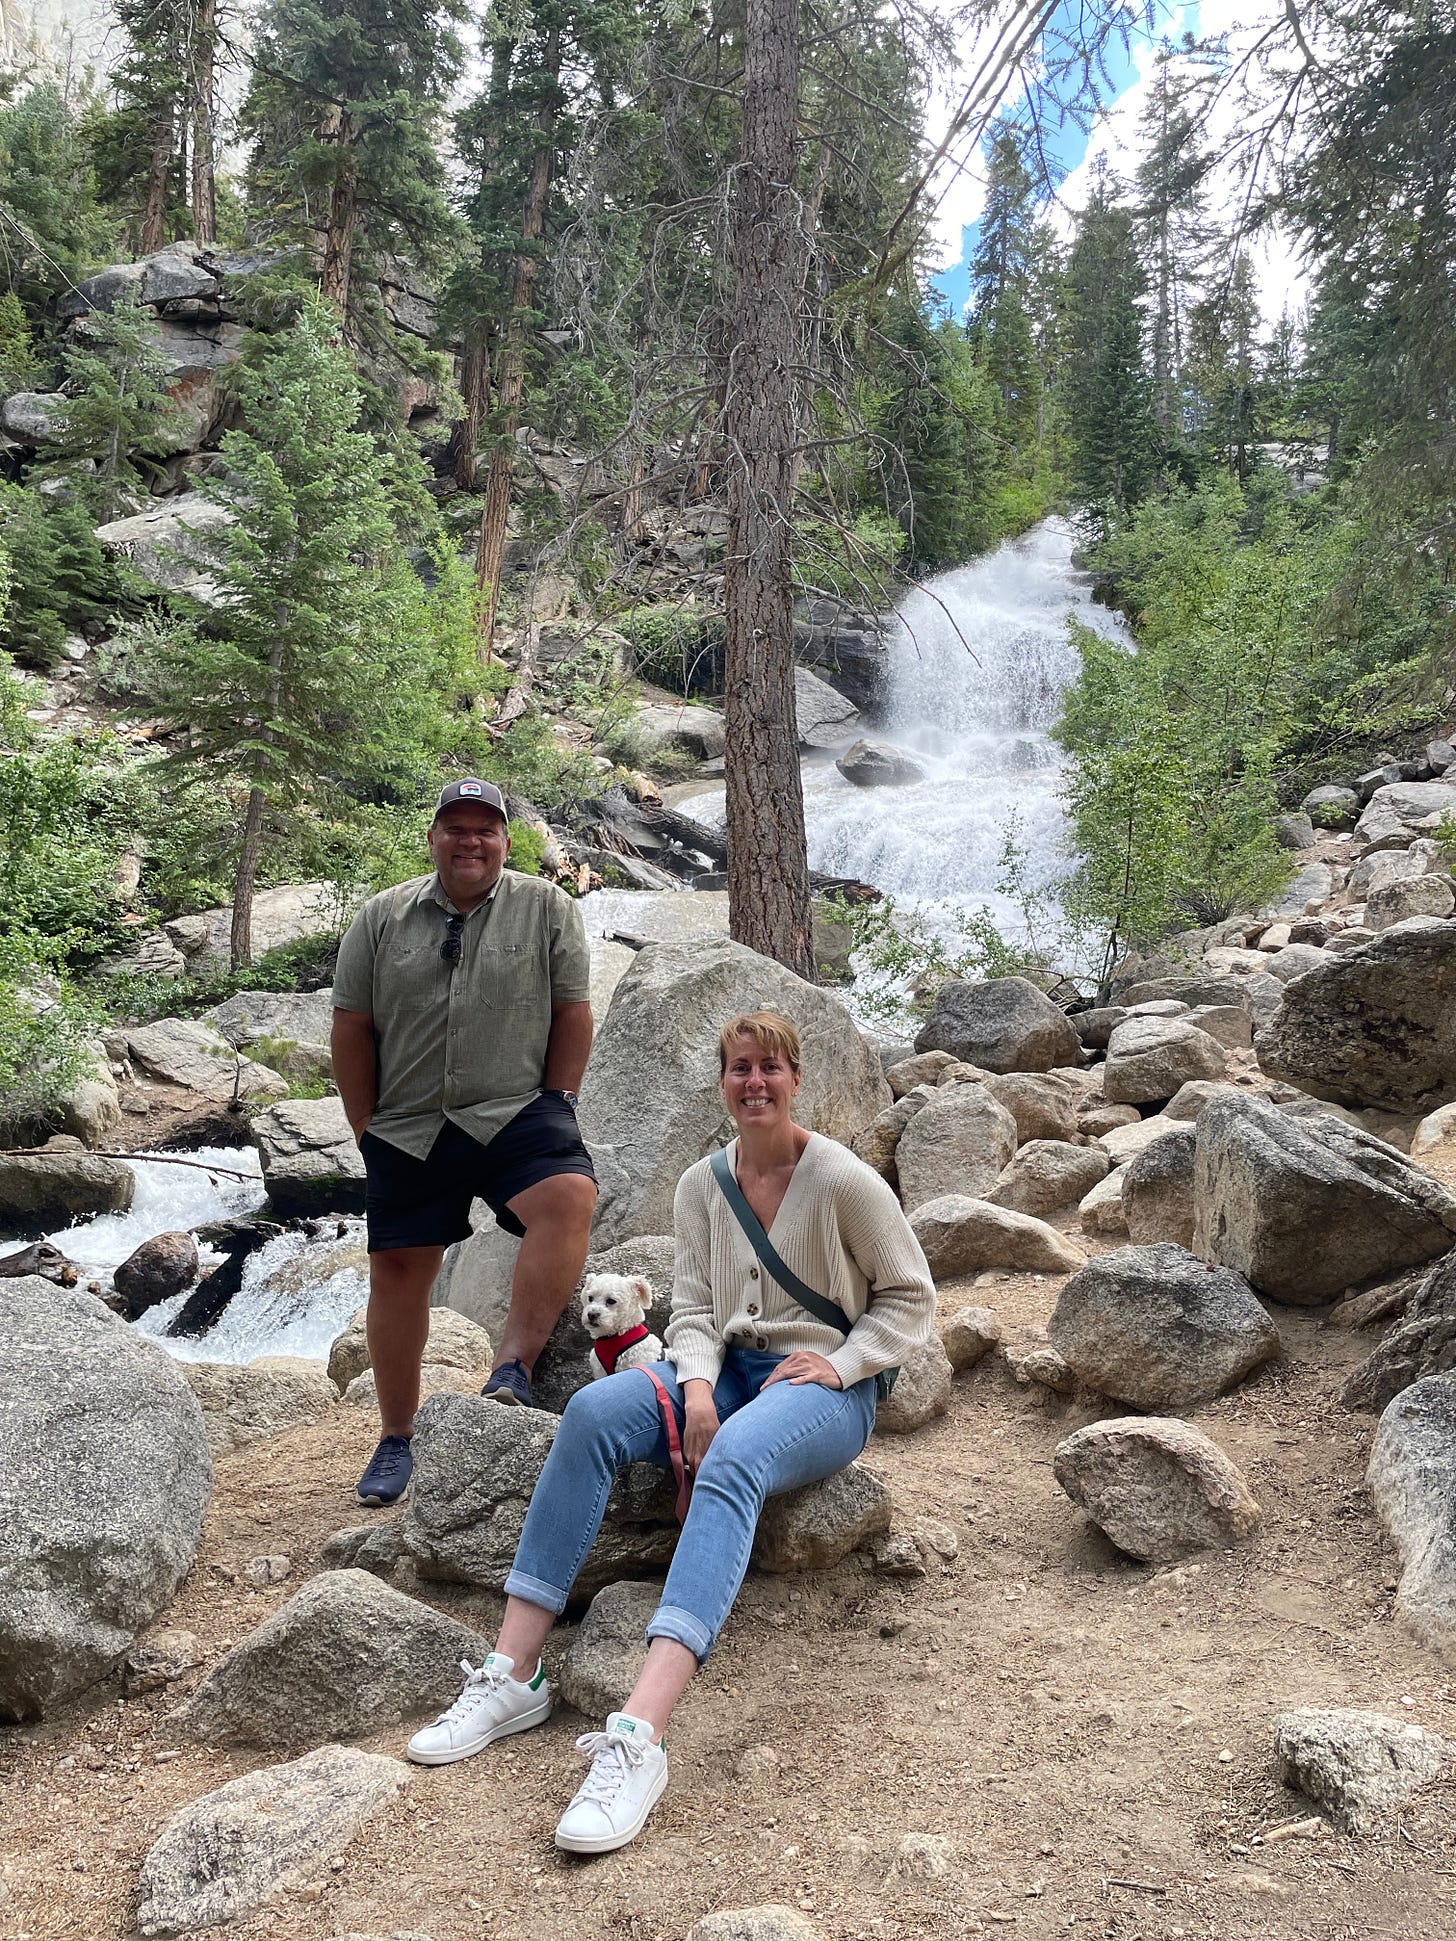 Mickey, Julie, and their dog Ellie at the base of a waterfall, surrounded brgreen trees and boulders in whitney portal